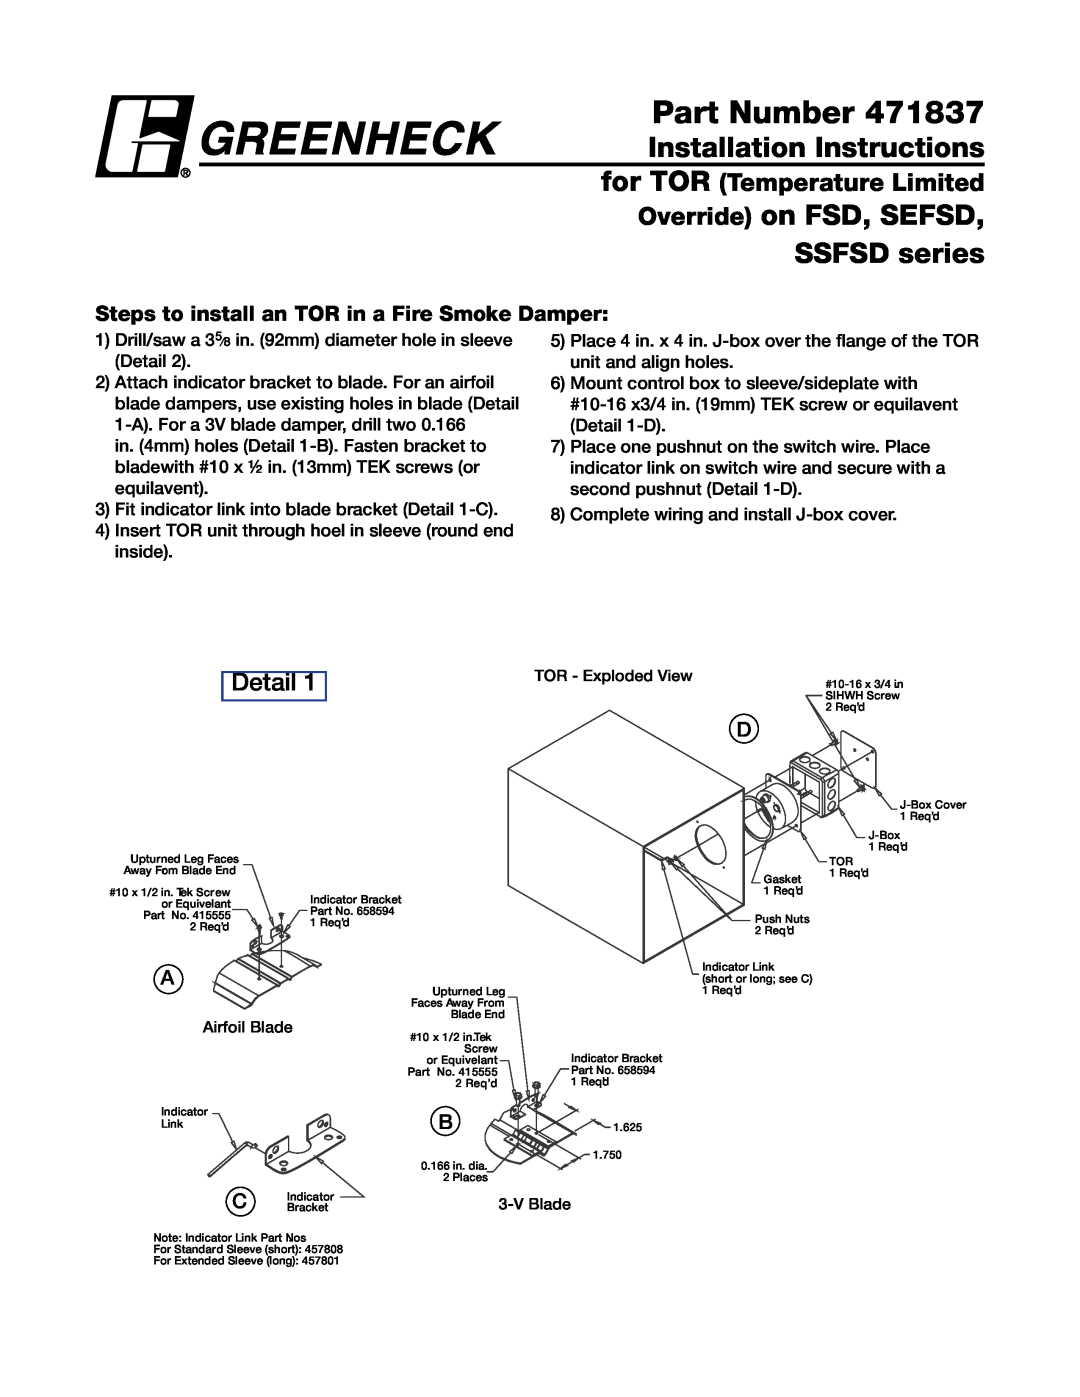 Greenheck Fan 471837 installation instructions Detail, Steps to install an TOR in a Fire Smoke Damper, Part Number 